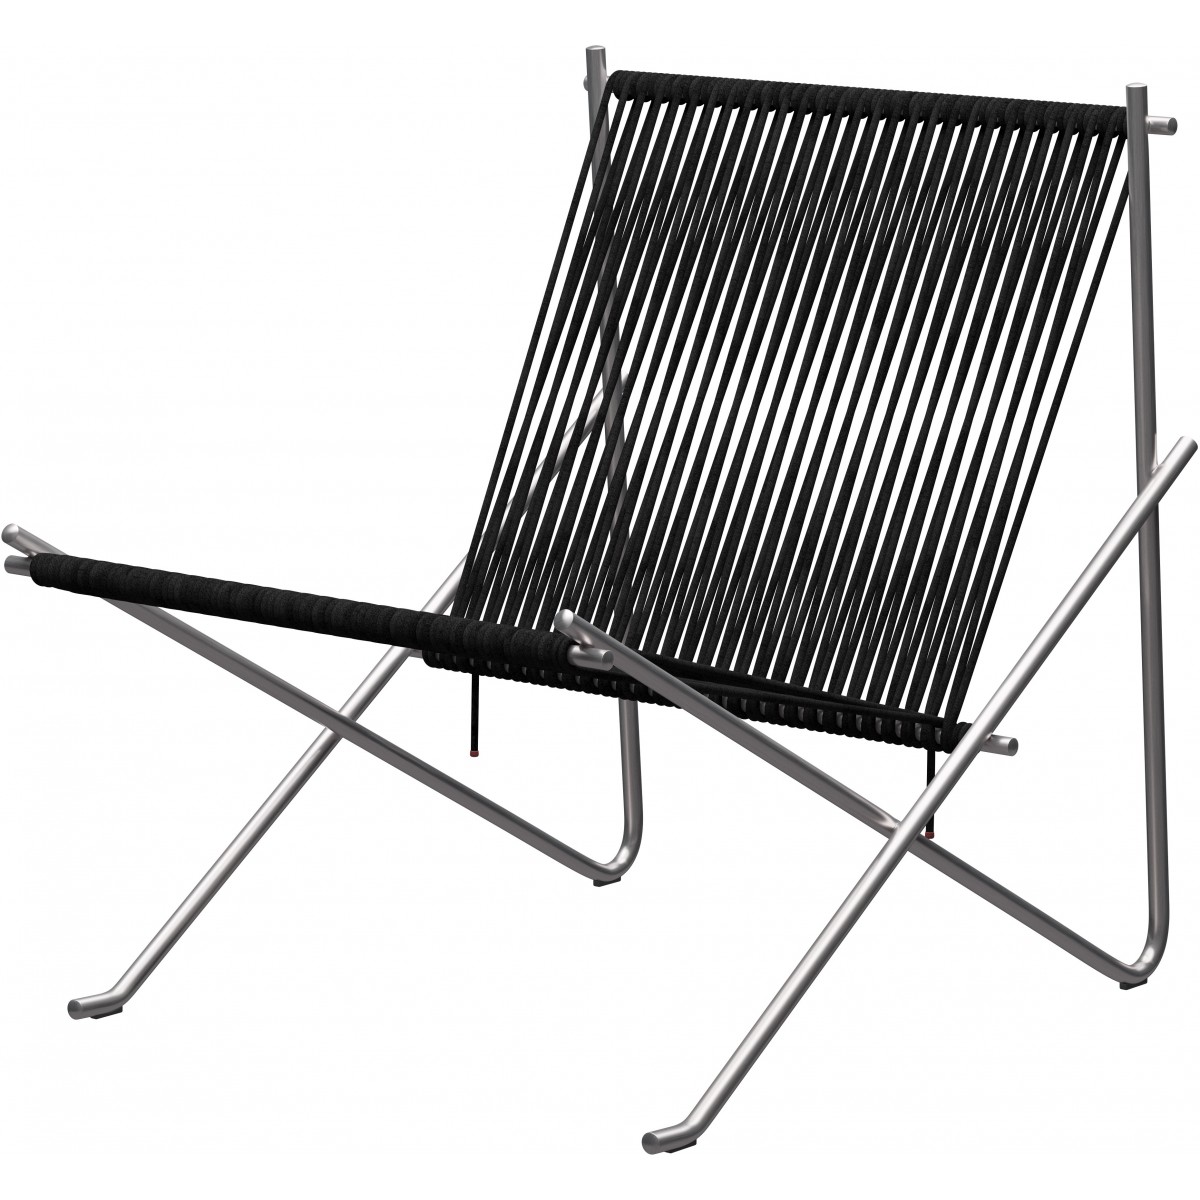 PK4 Lounge chair – Black + Brushed stainless steel